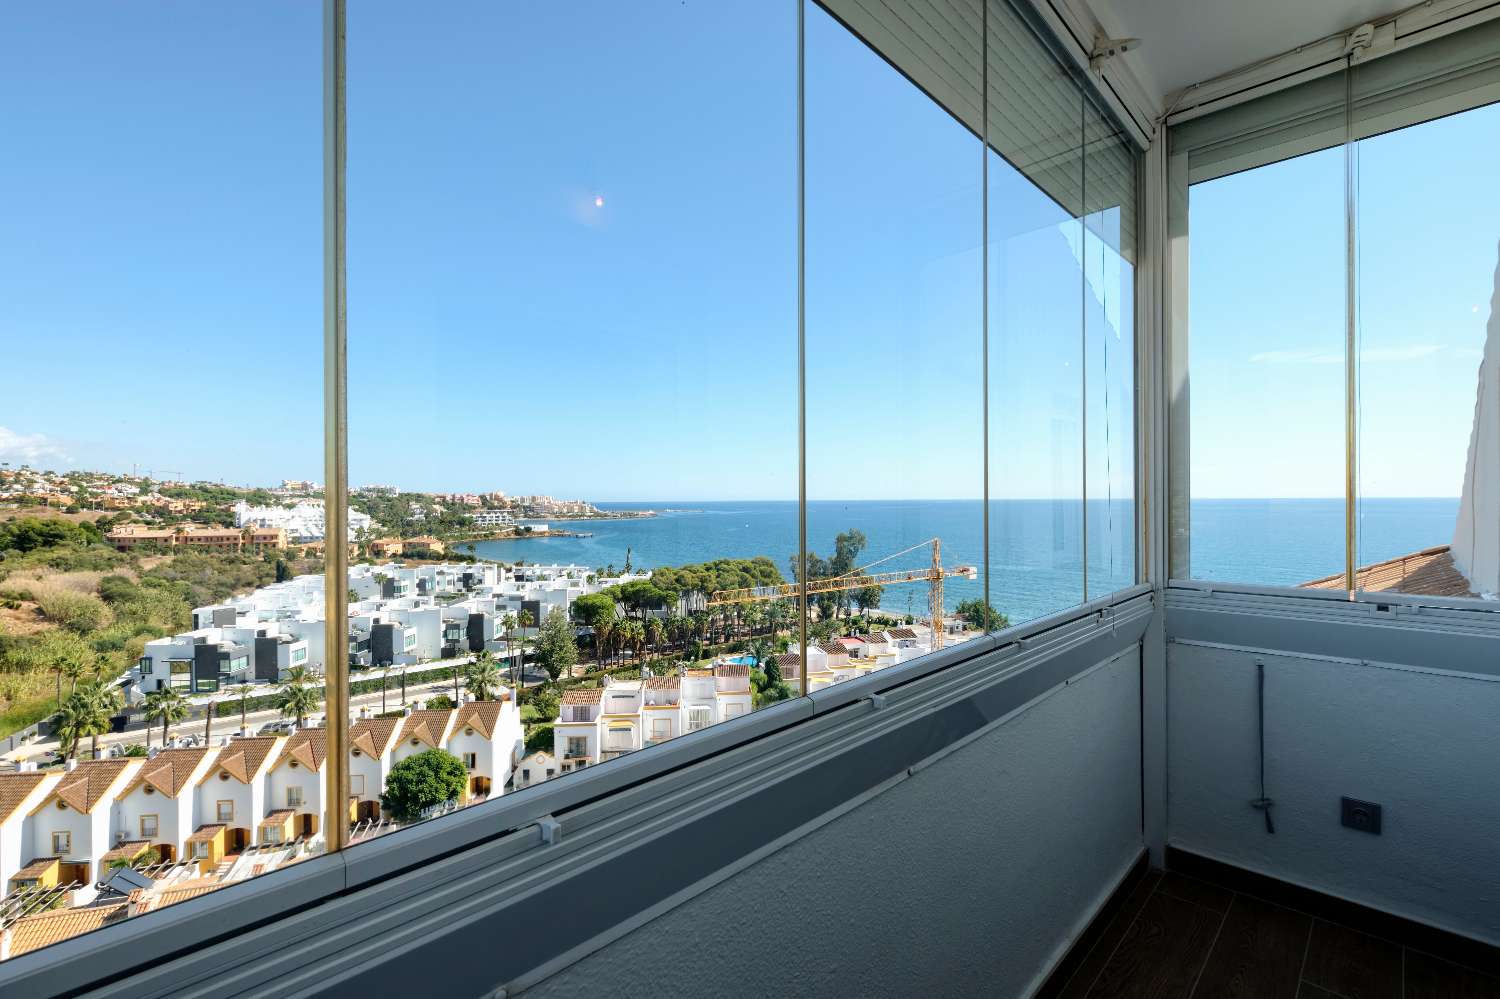 Fantastic south facing 3 bedroom duplex penthouse on the beachfront.